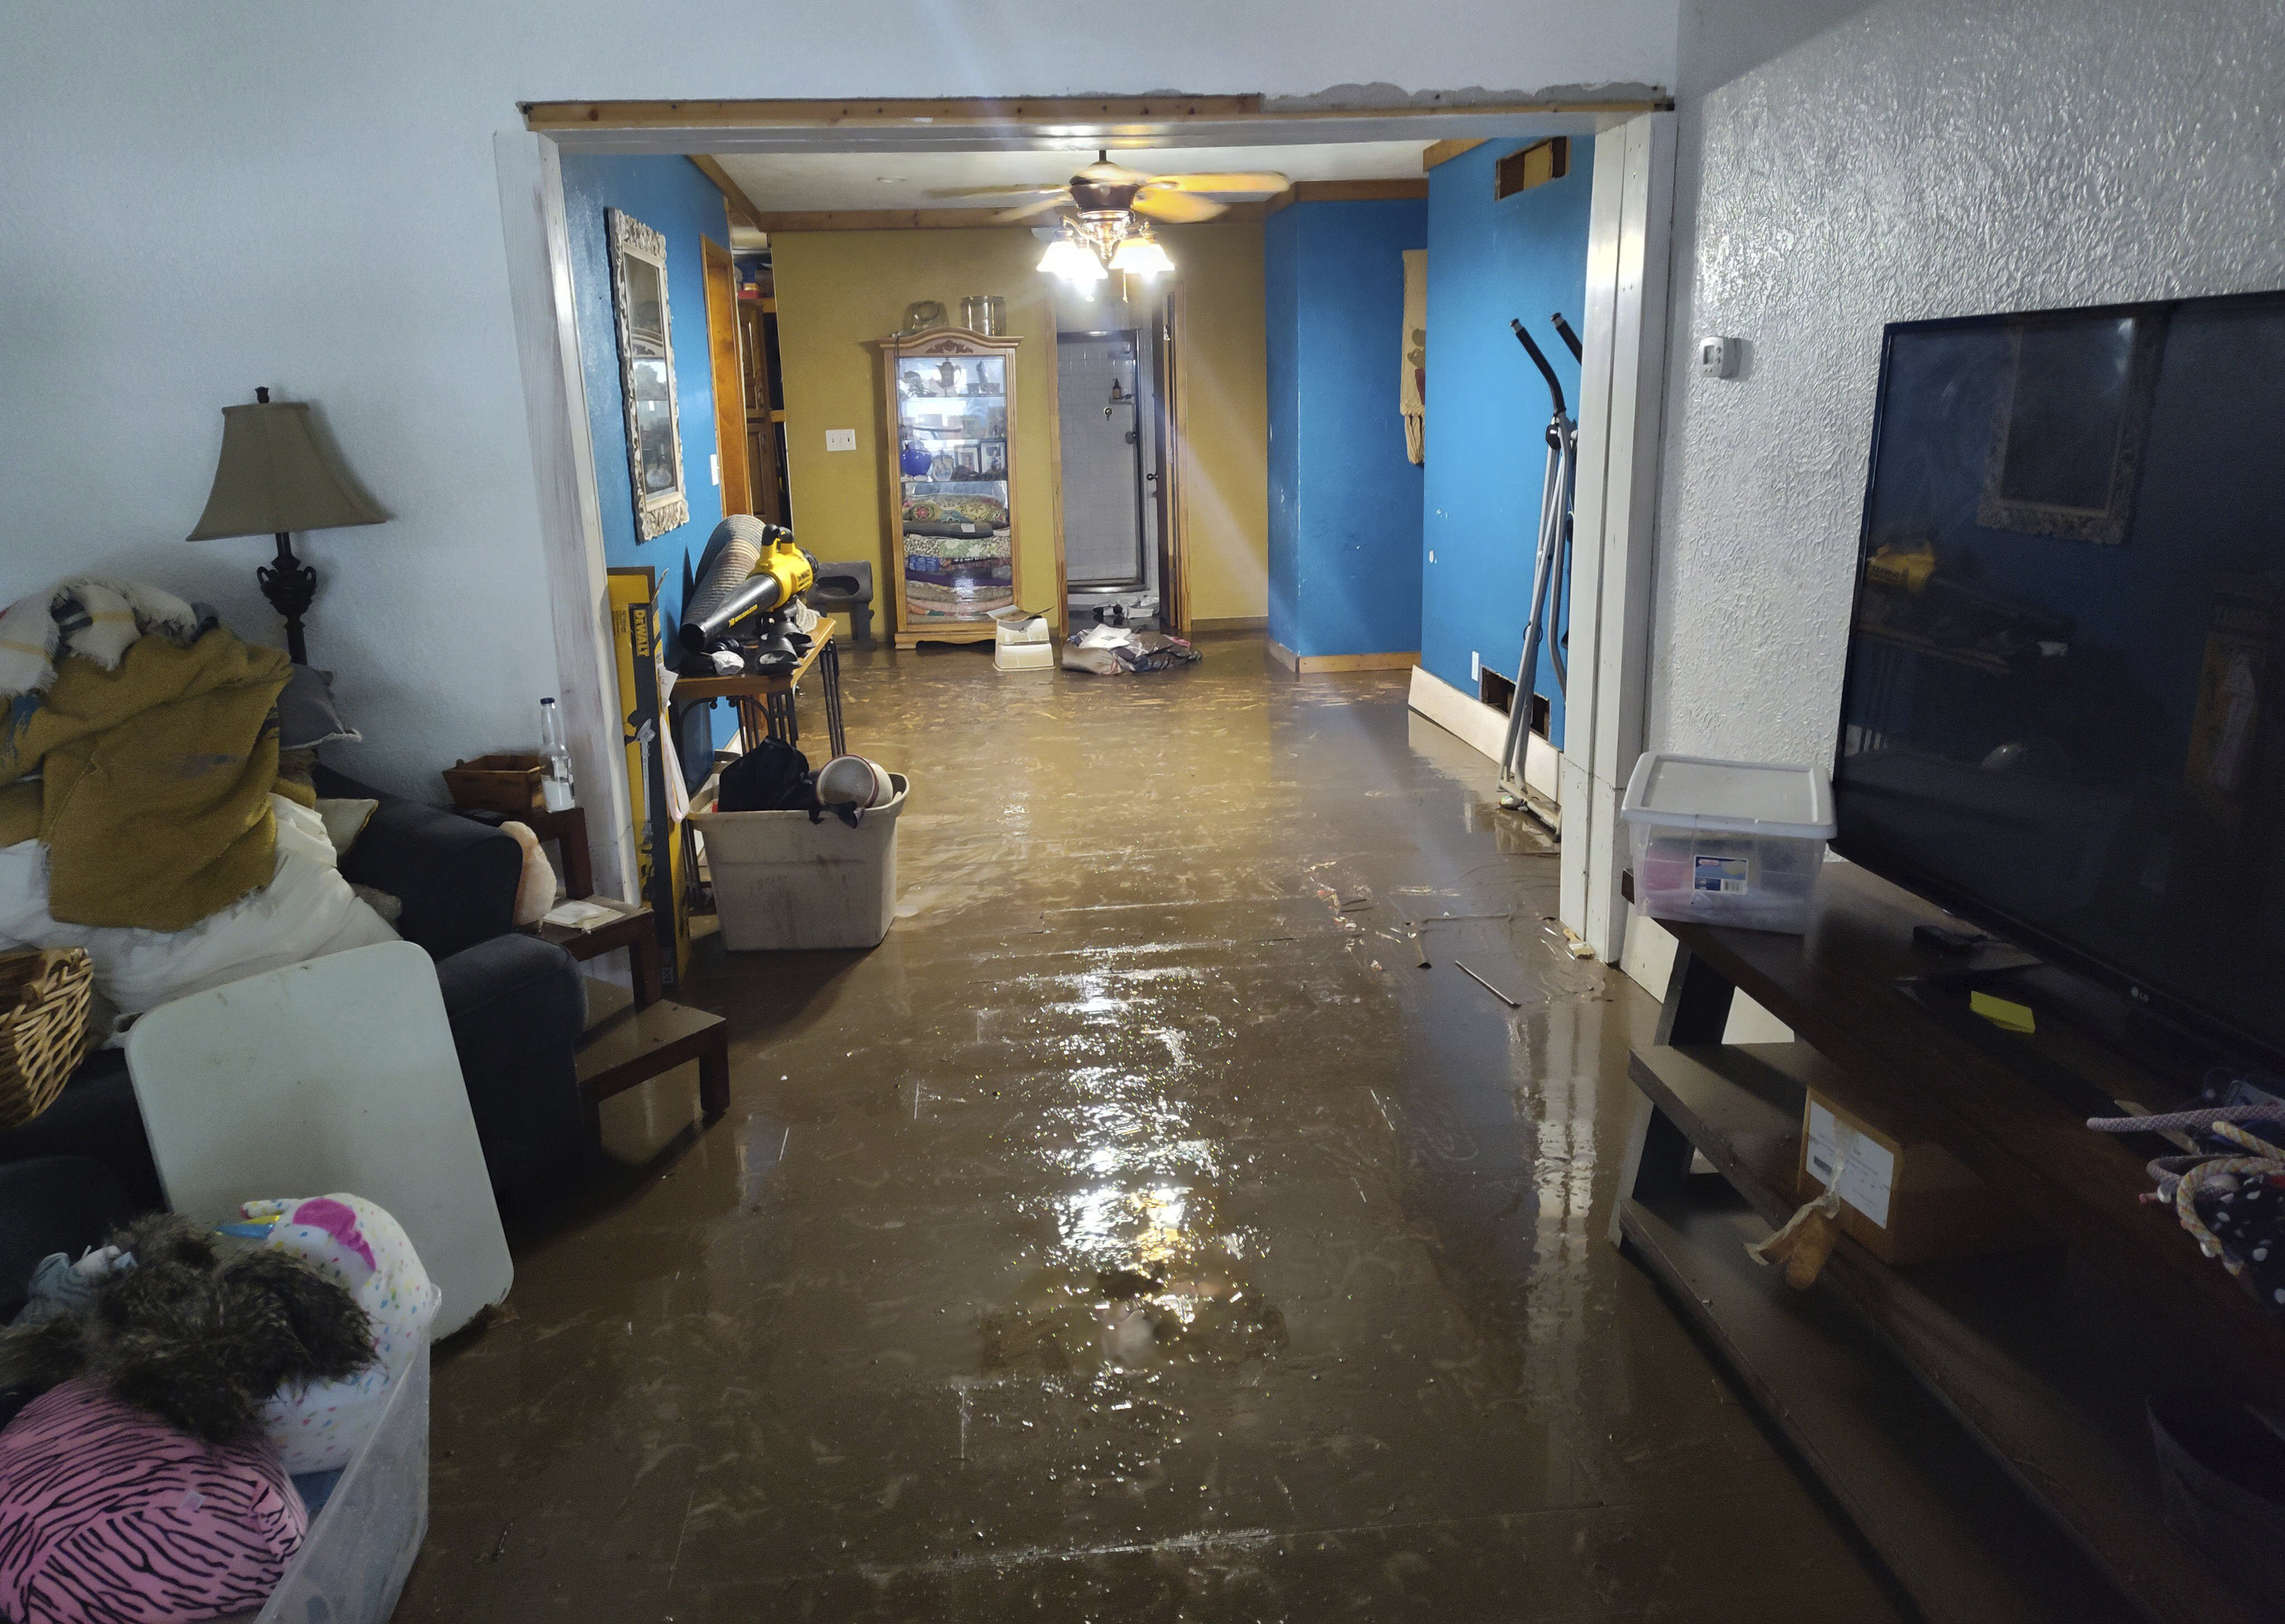 Water and mud coat the floor of Jami Lane's home in Nashville, Ill., after a nearby creek flooded on Tuesday, July 16, 2024. Lane said the floodwaters reached three feet deep on the main floor of the home, and had never previously entered the house in her roughly 20 years of living there. (Ben Gray/St. Louis Post-Dispatch via AP)